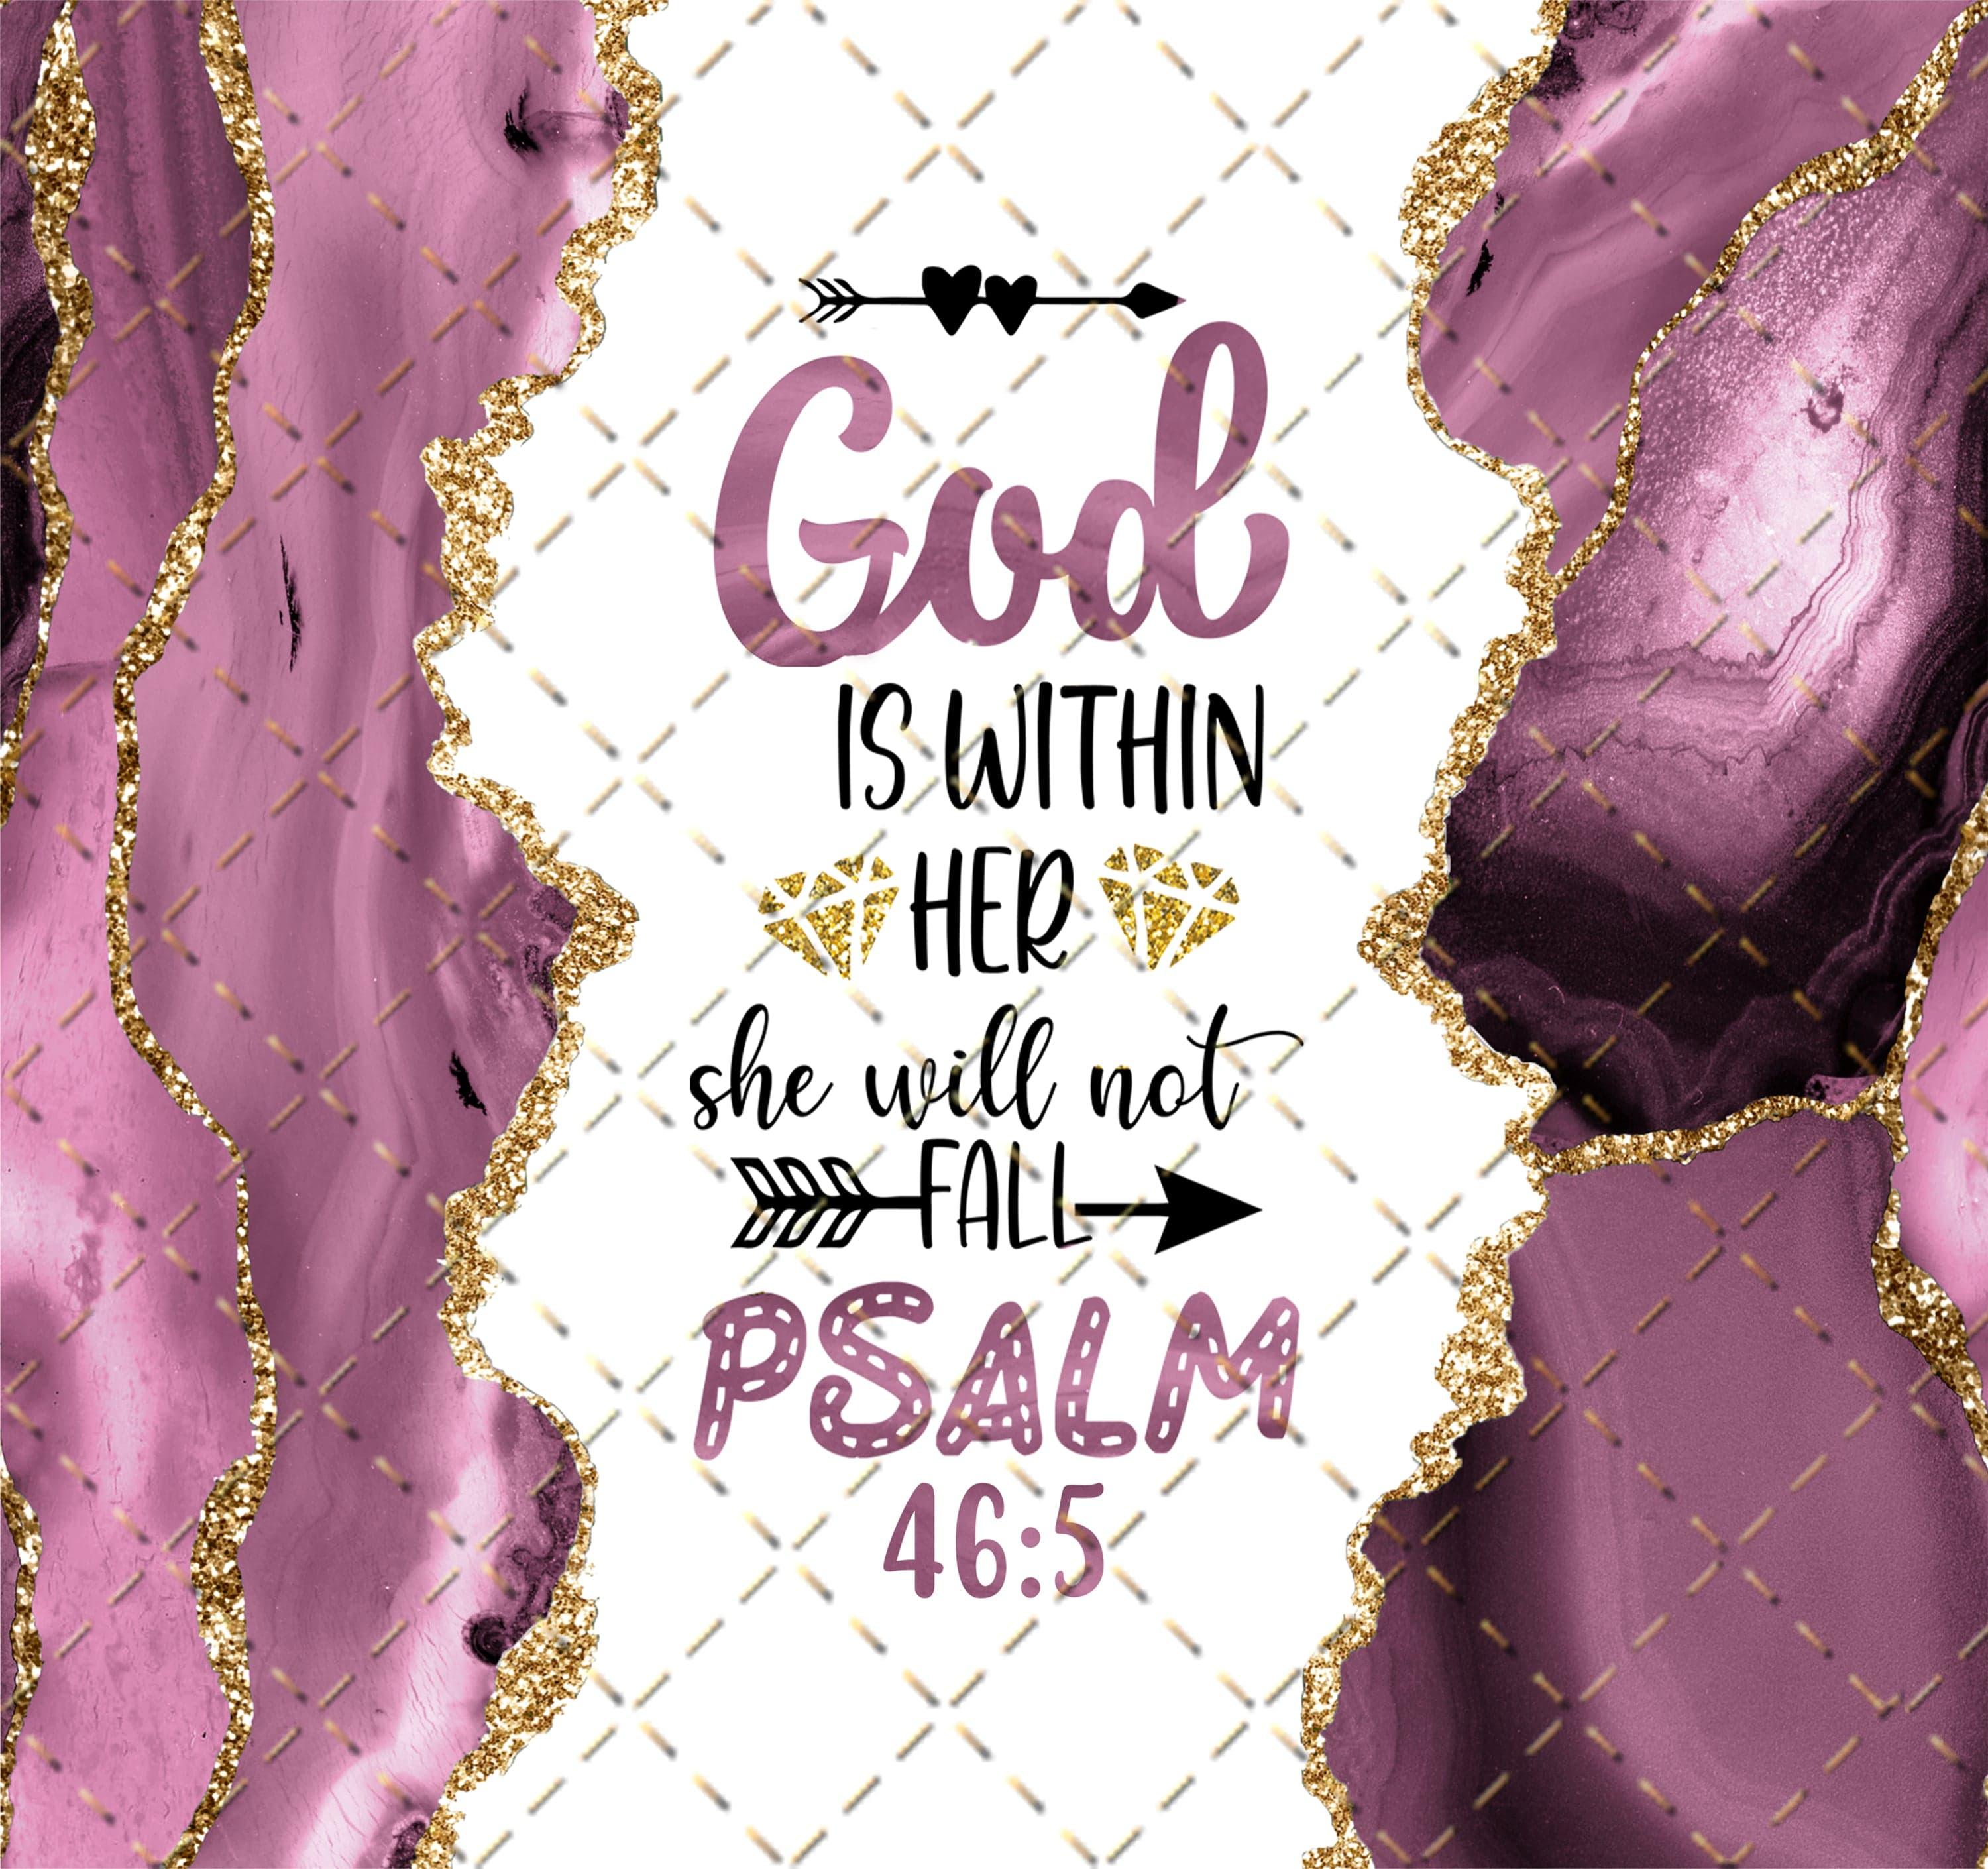 God Is Within Her 30 oz. Straight Skinny Tumbler by SSC Designs - Scrapbook Supply Companies